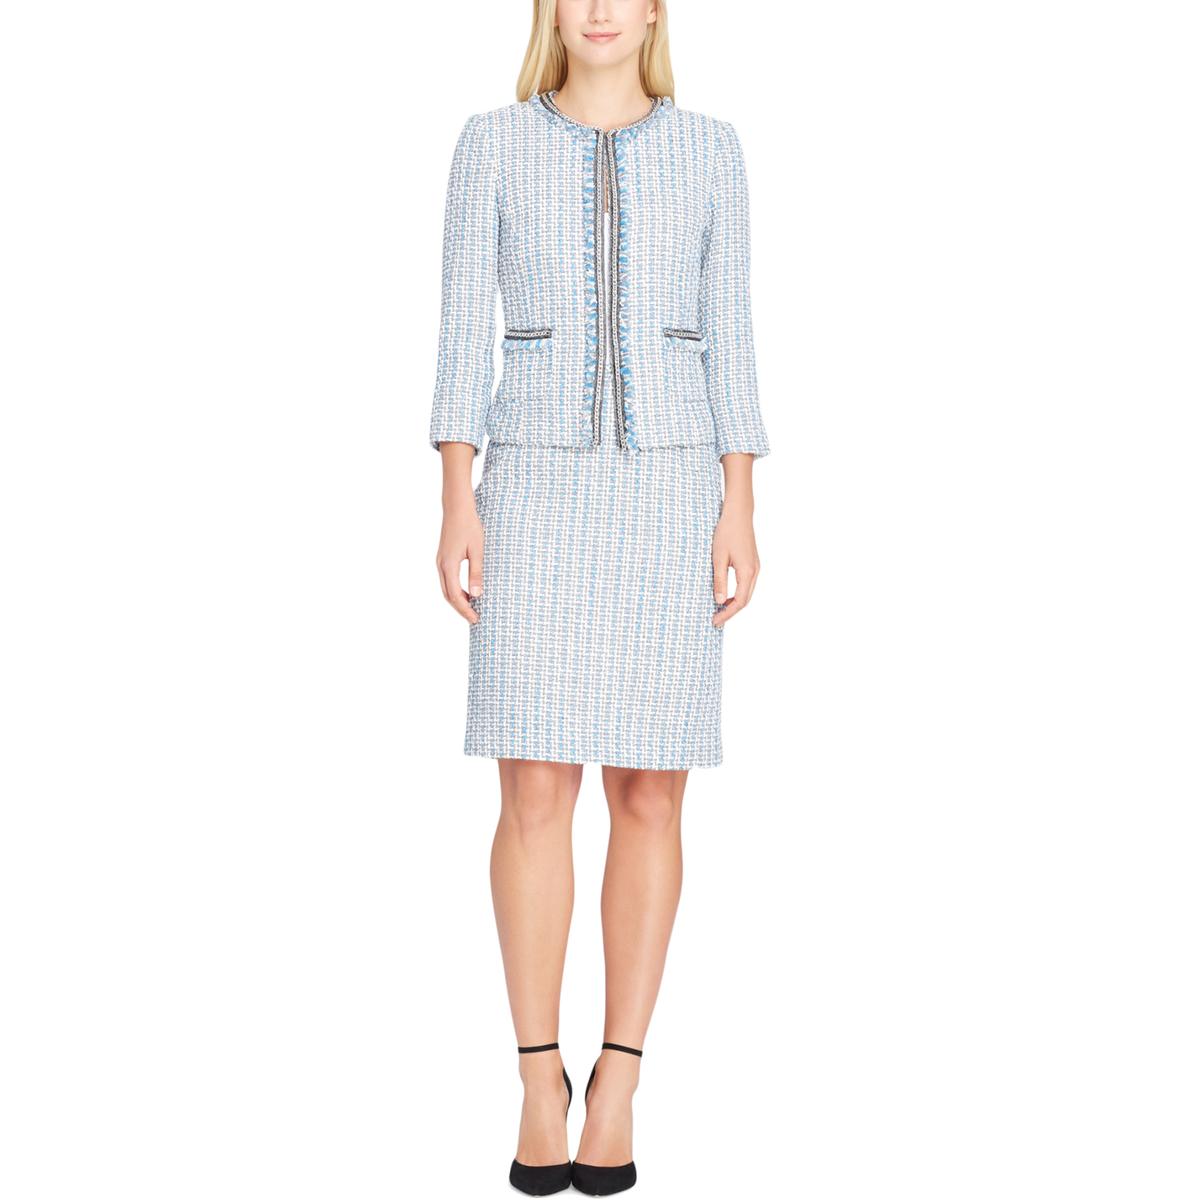 Details about Tahari ASL Womens Blue 2PC Embellished Officewear Skirt Suit  10 BHFO 8503